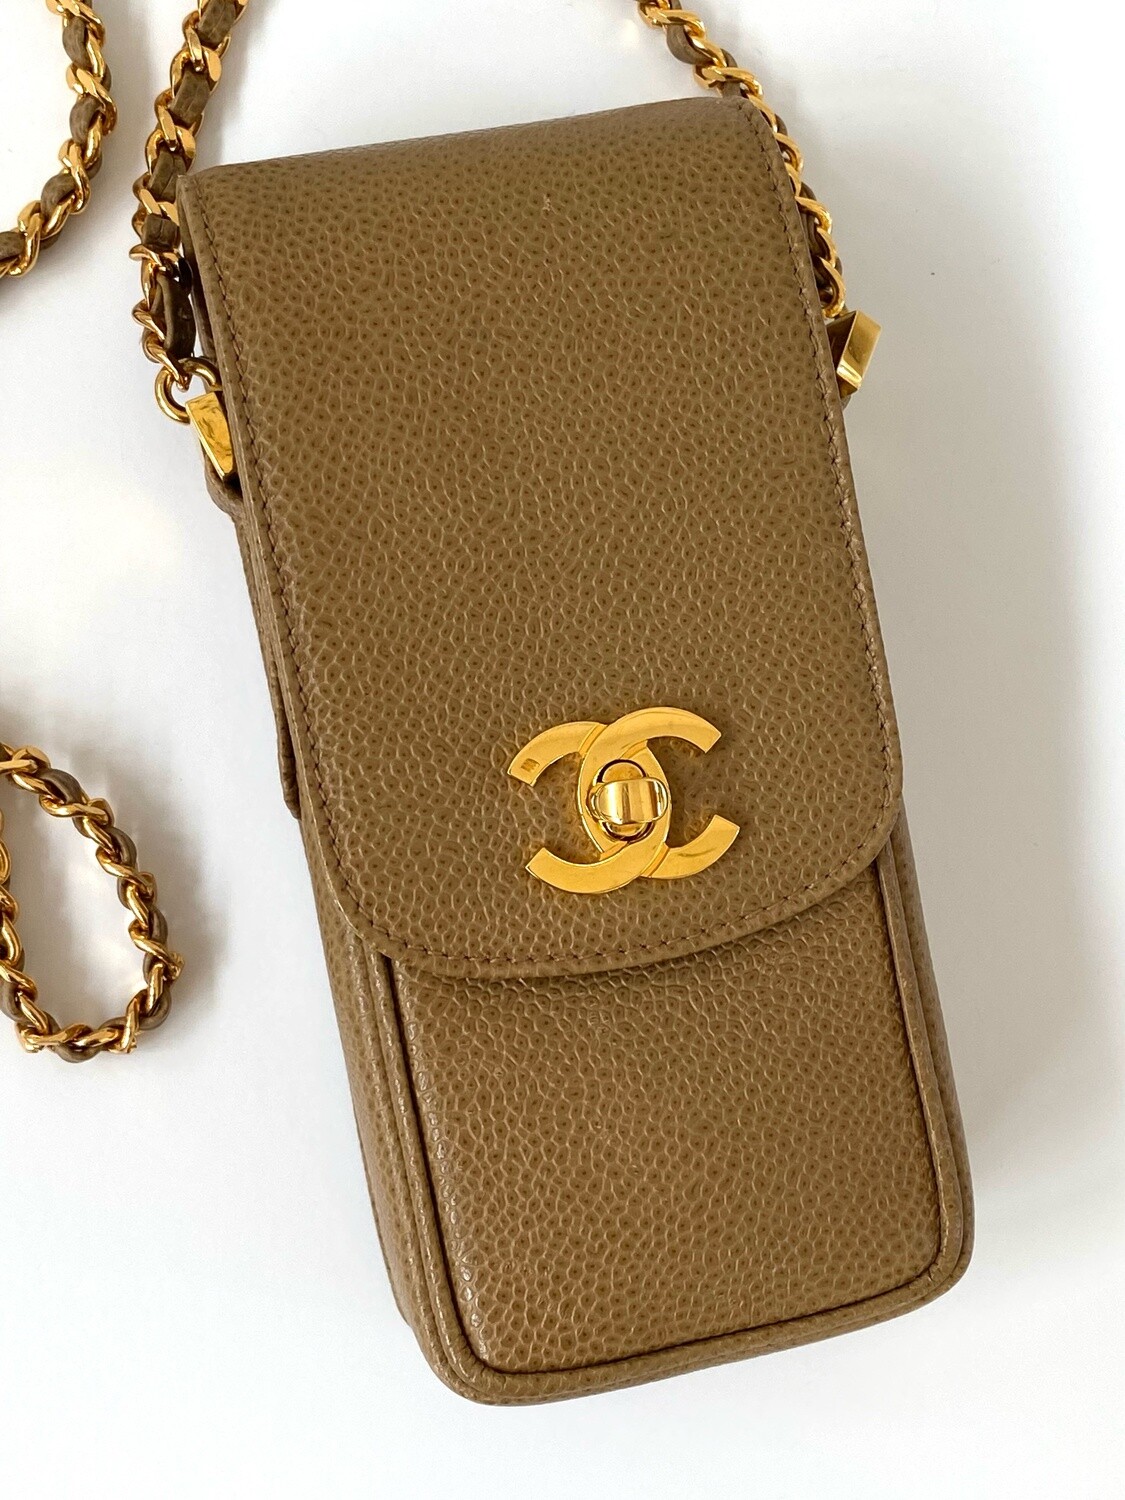 chanel bag with adjustable strap sports